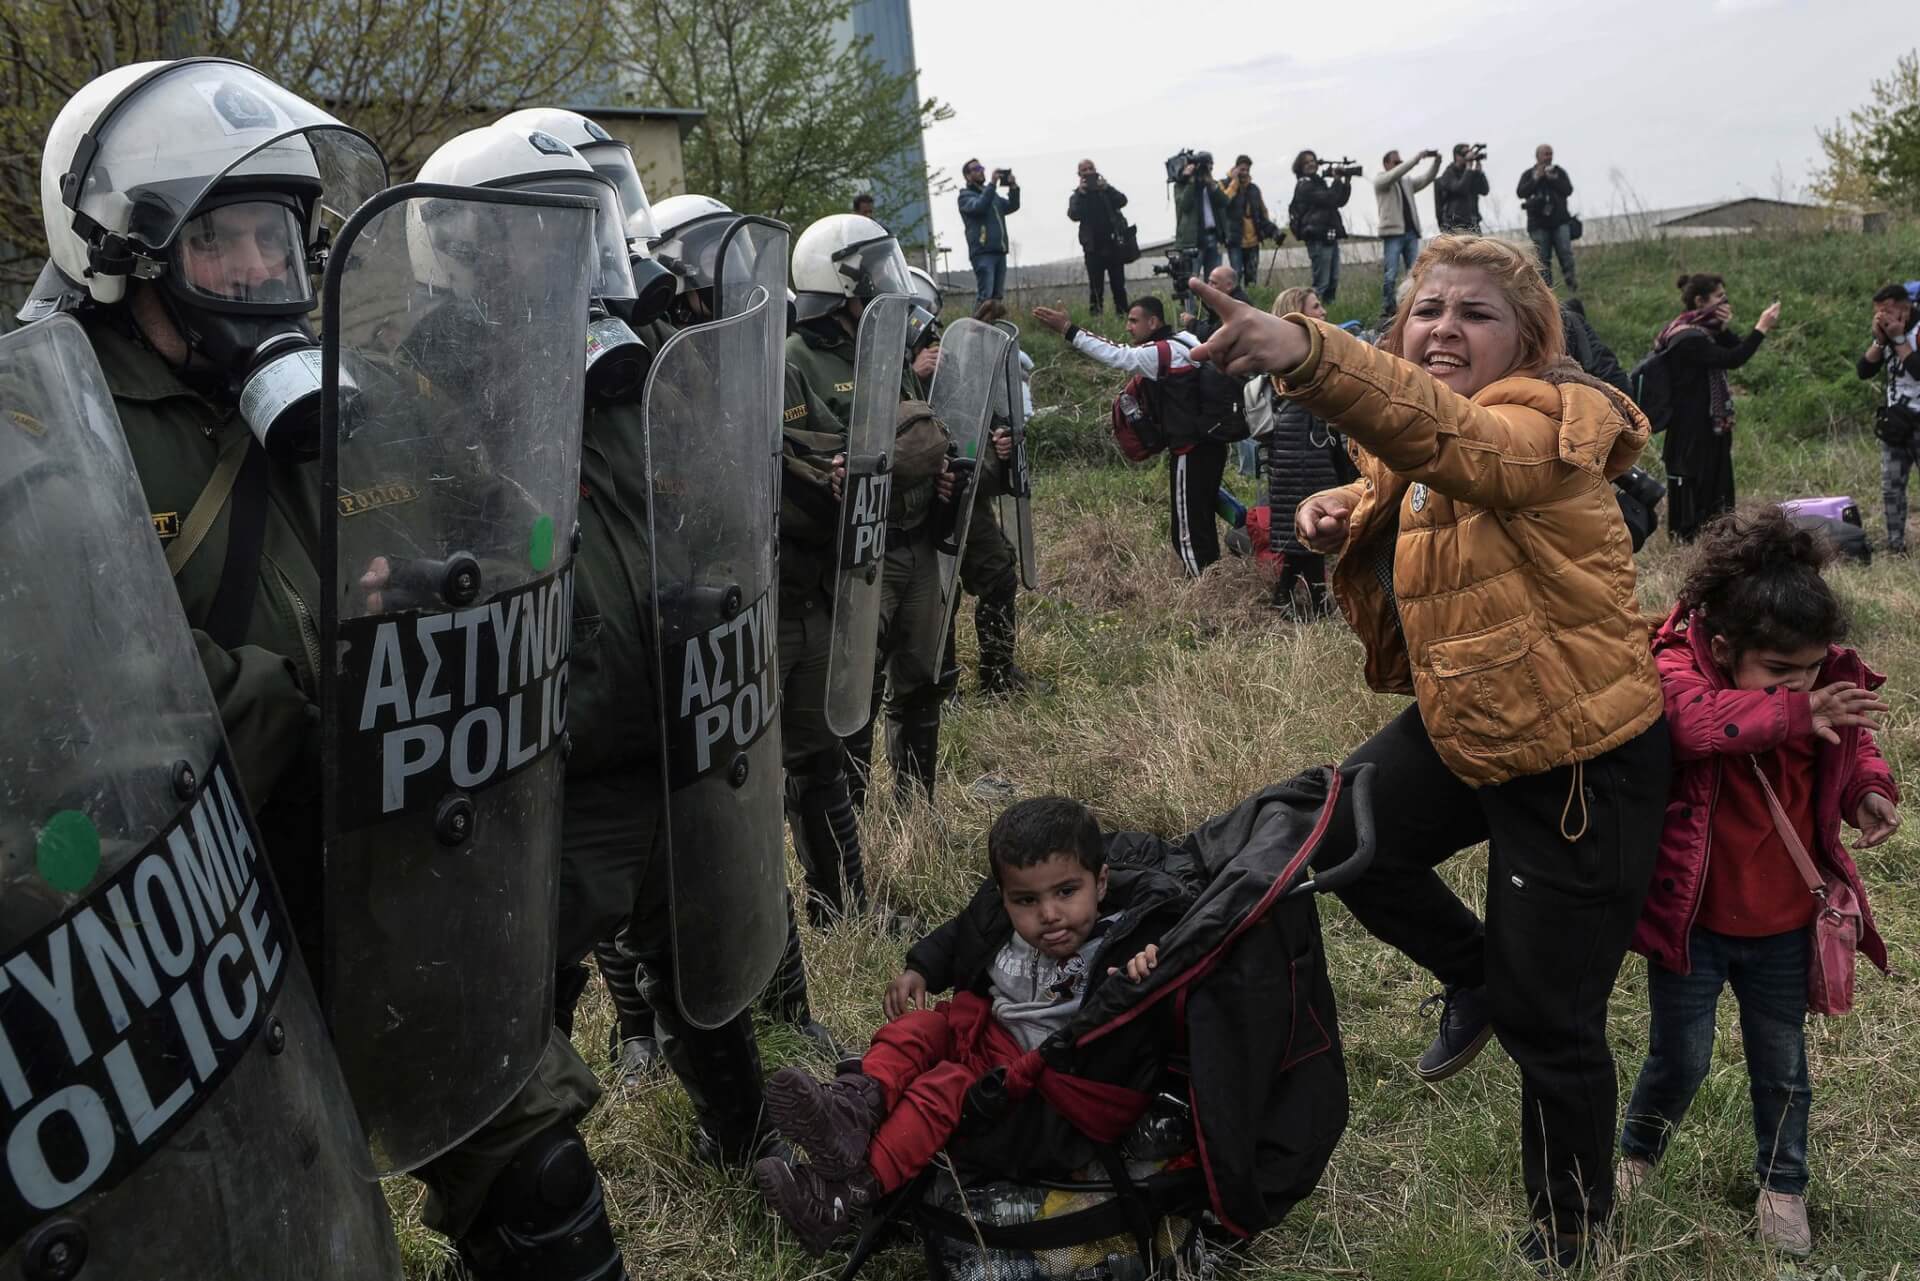 Demonstrators on Greek Islands Clash with Riot Police Over Construction of Migrant Camps